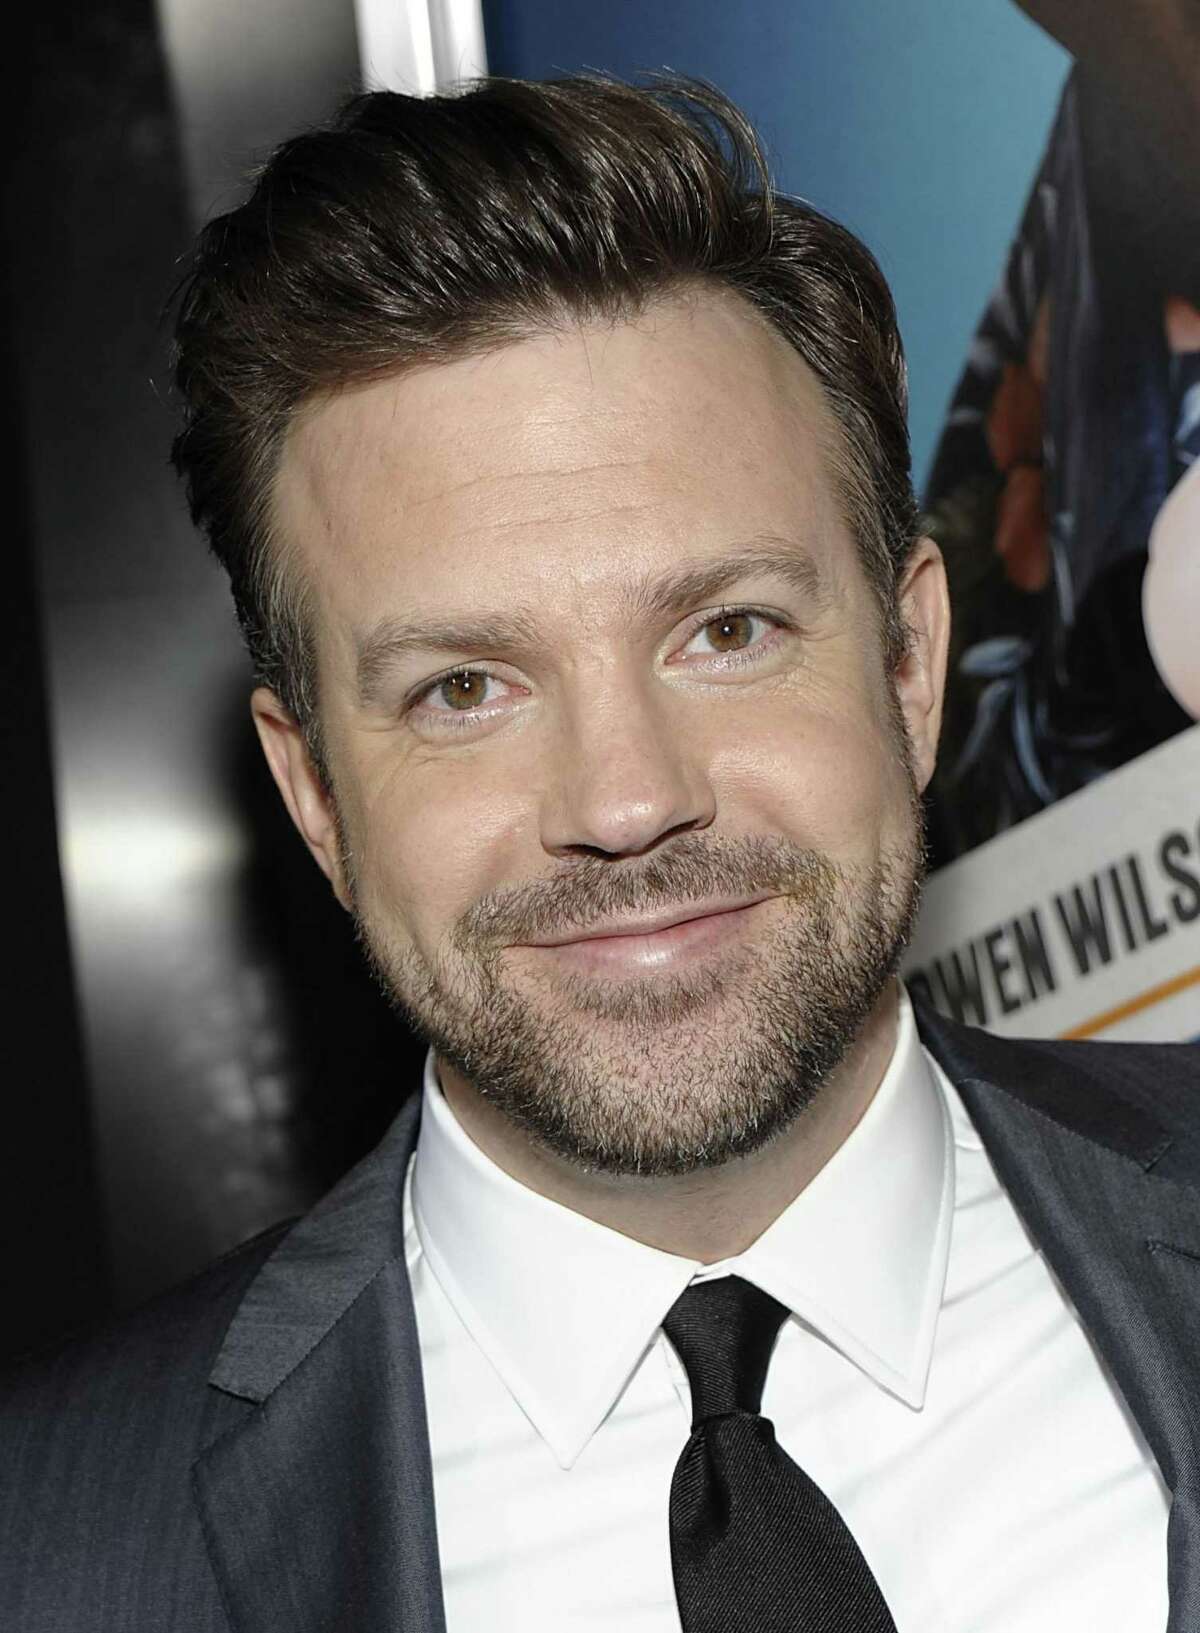 23, 2011, file photo, actor Jason Sudeikis arrives at the premiere of the f...